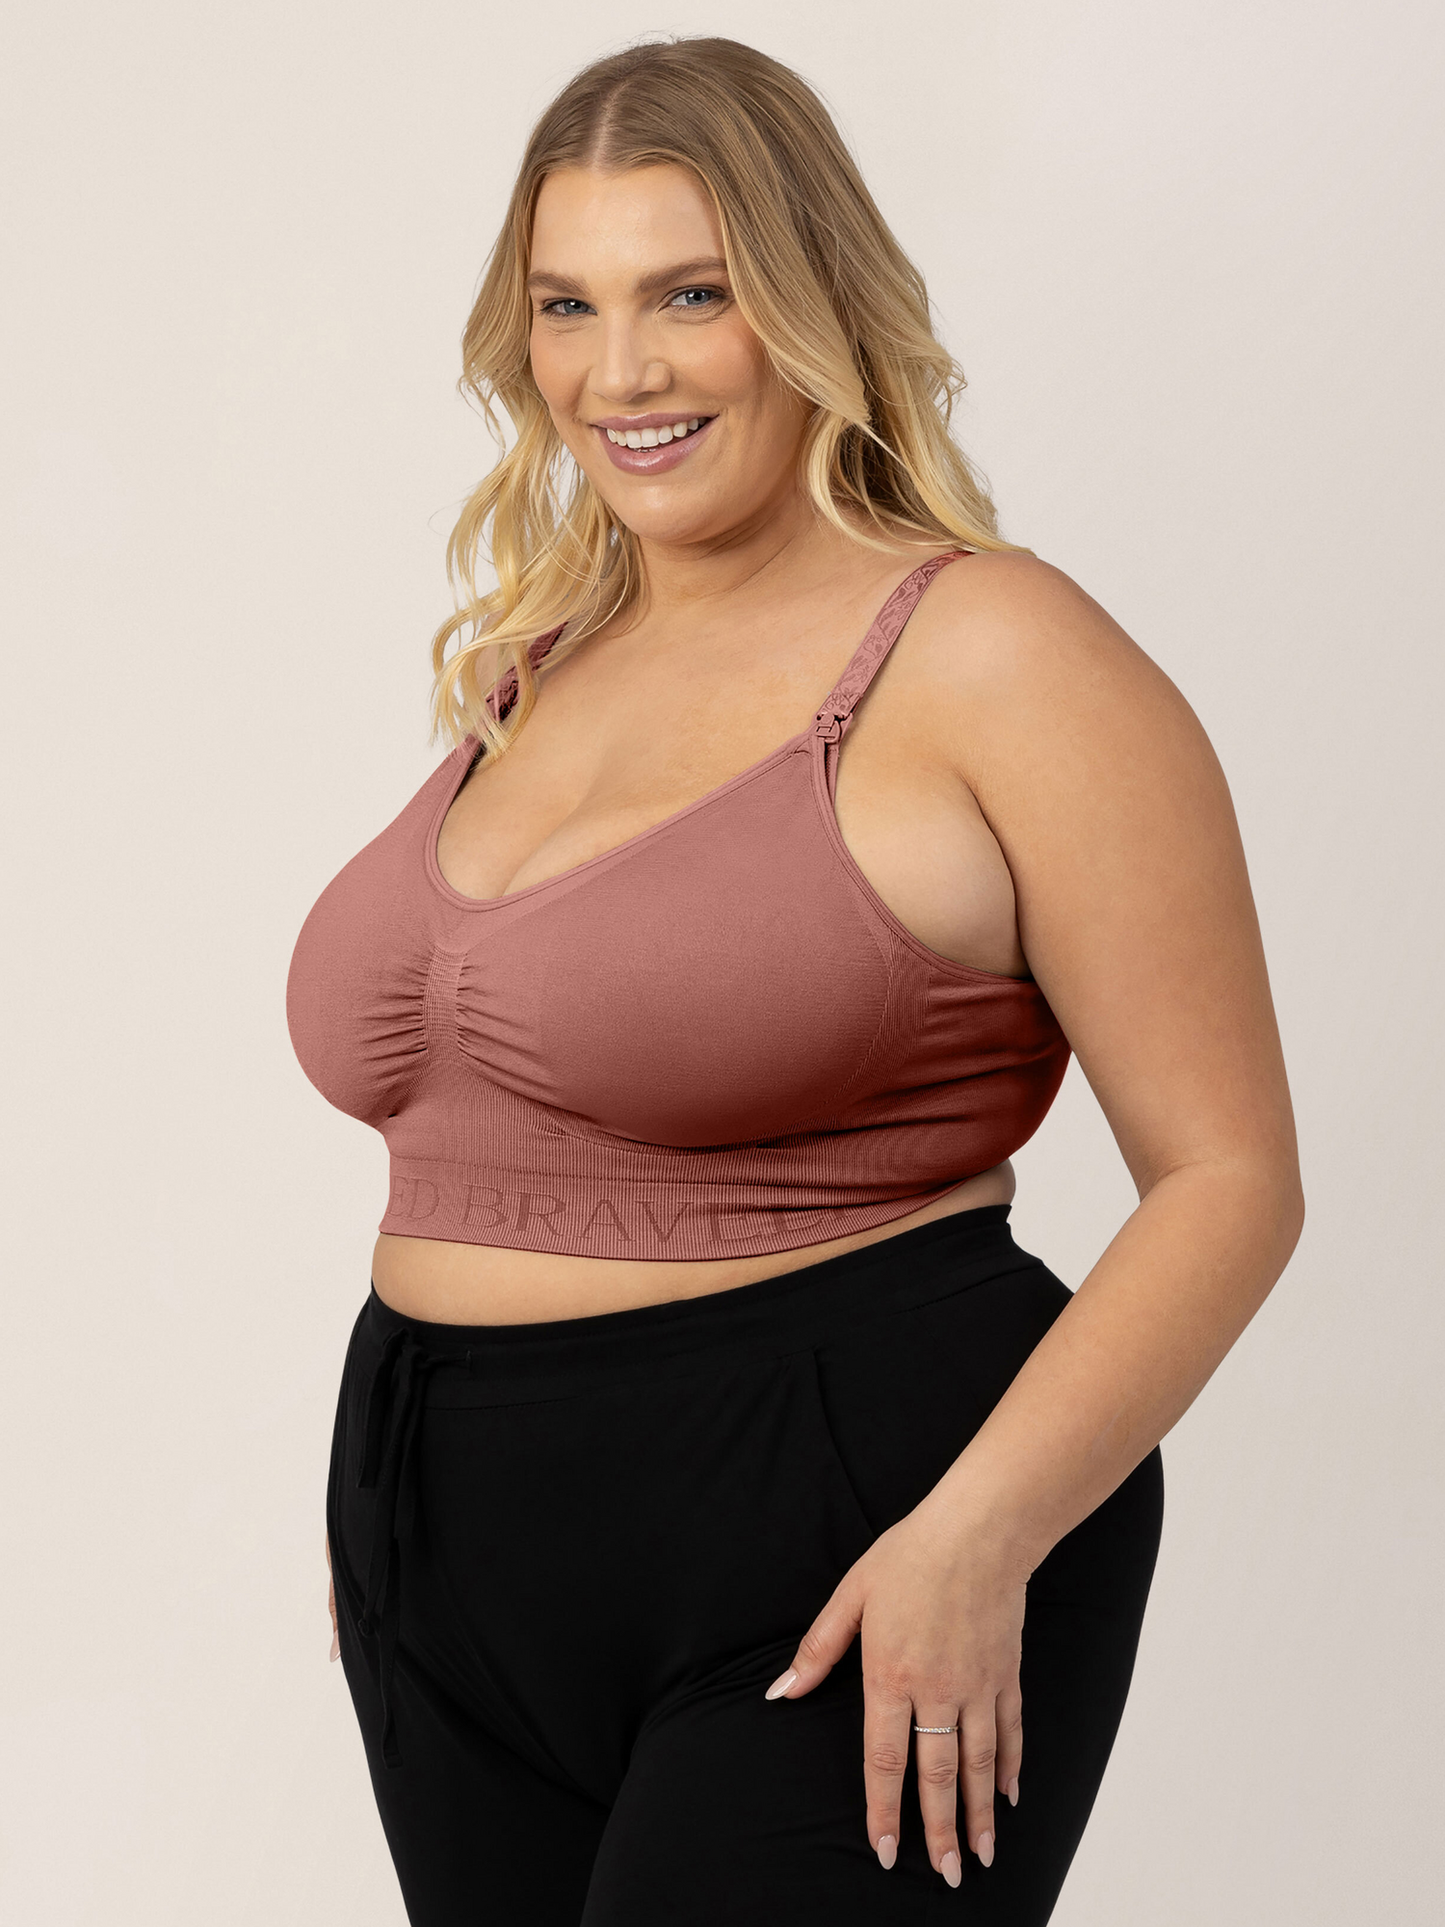 Model wearing the Simply Sublime® Nursing Bra in Redwood with her hand on her thigh.